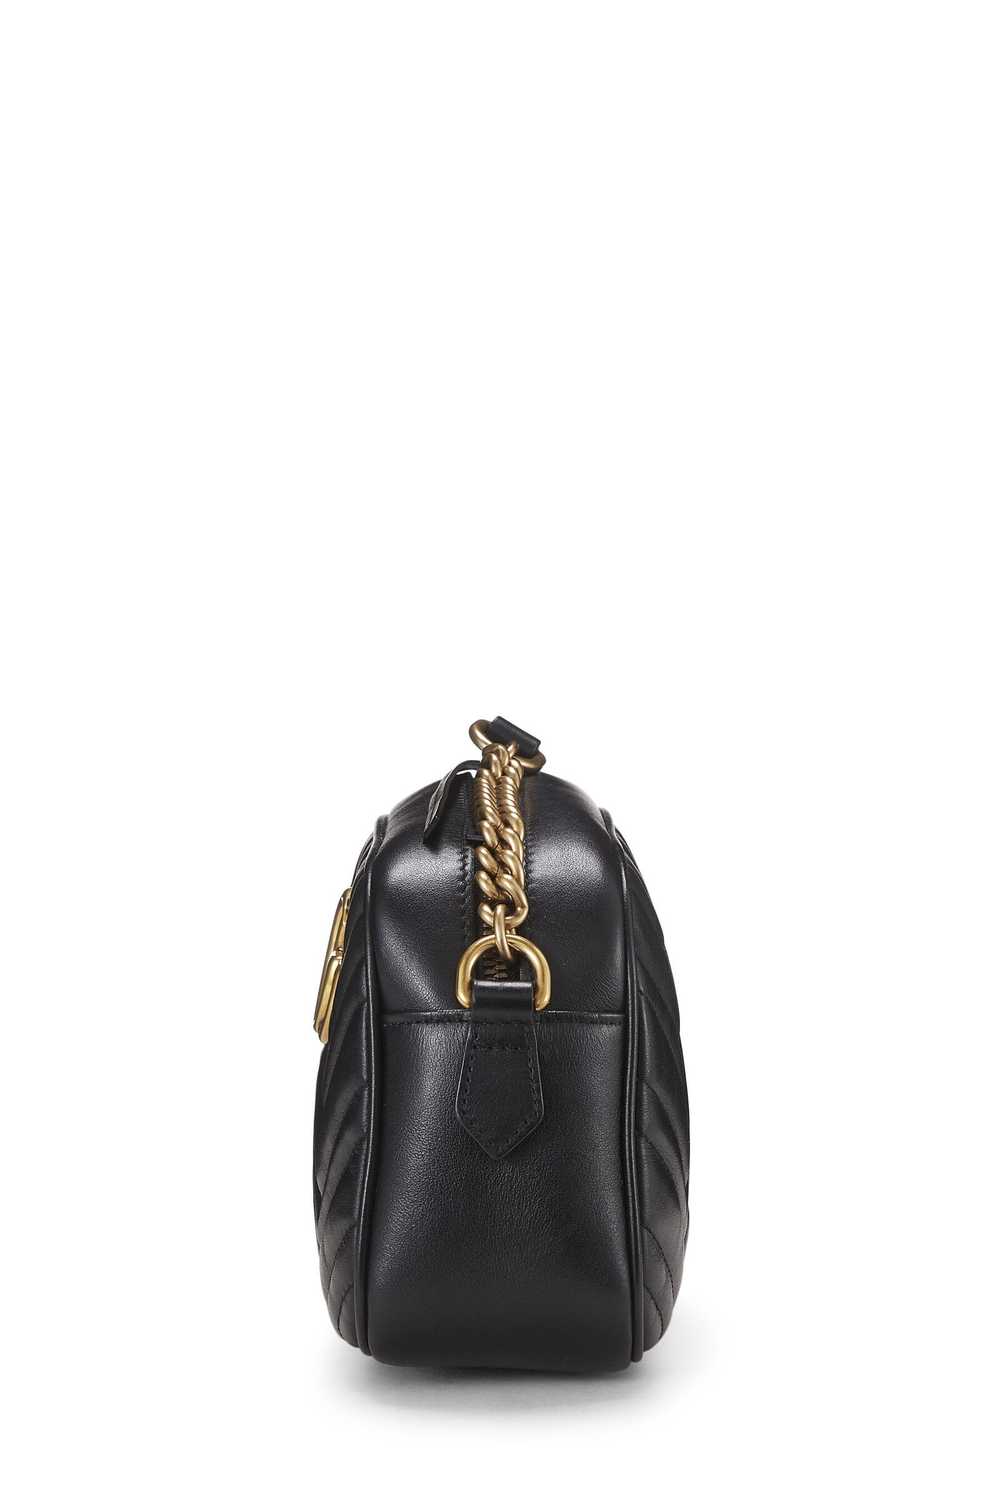 Black Leather GG Marmont Crossbody Small - image 3